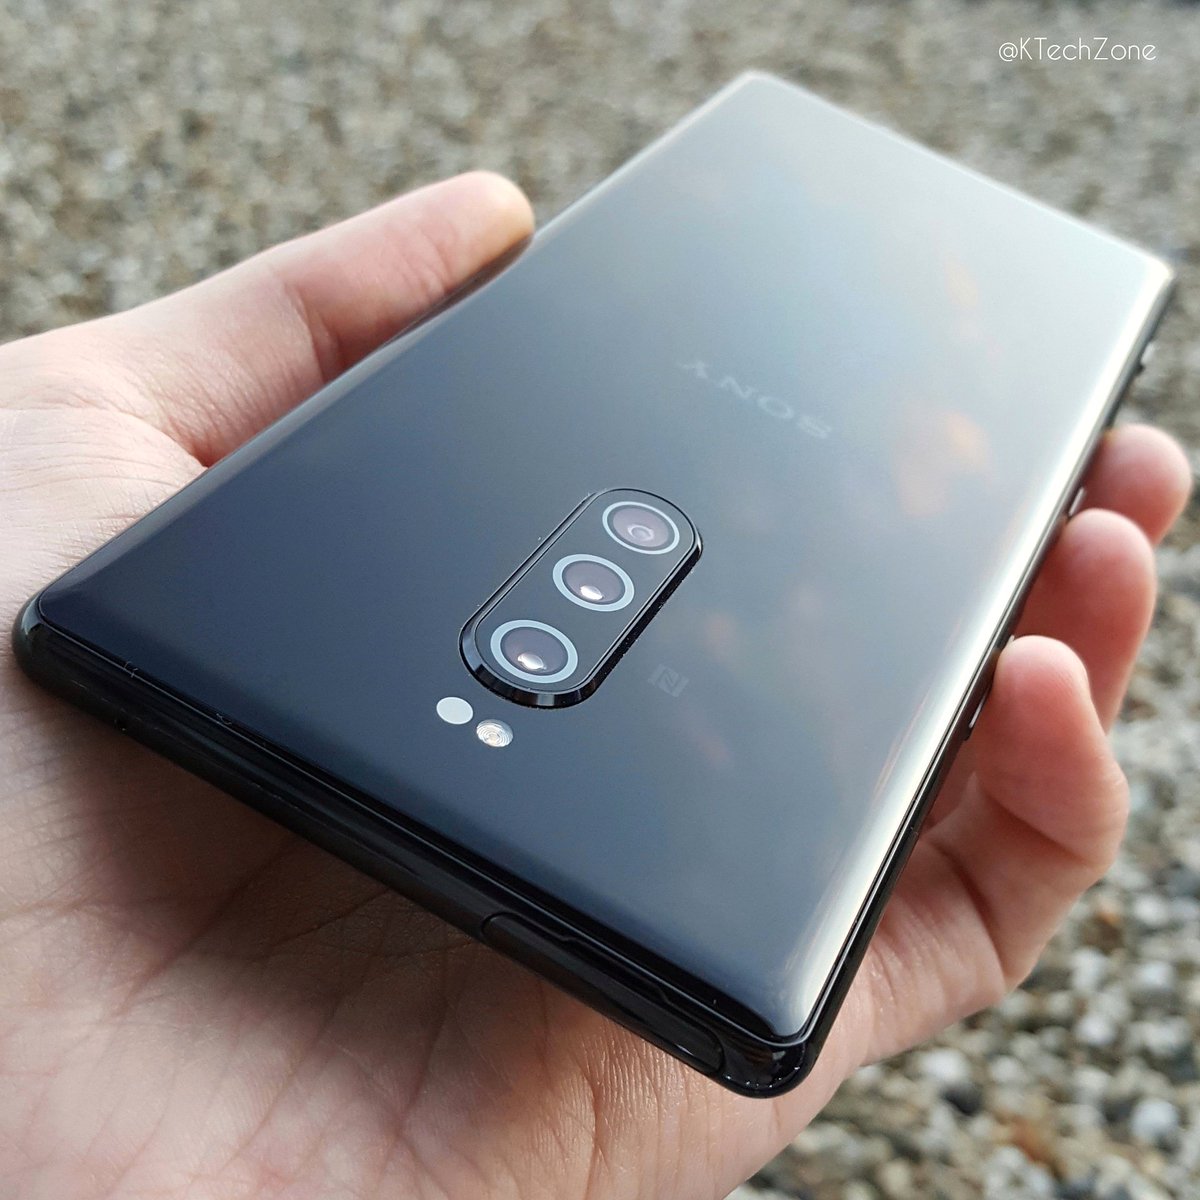 I try a lot of different #phones , BUT I always go back using the #xperia1 😆 Boxy design, killer 4k 21:9 #cinewide display.. THE MOST UNDERRATED PHONE of 2019🔥
#sony #sonymobile #smartphone #smartphones #design #4kdisplay #oled #triplecamera #eyefocus #nfc #underratedphone